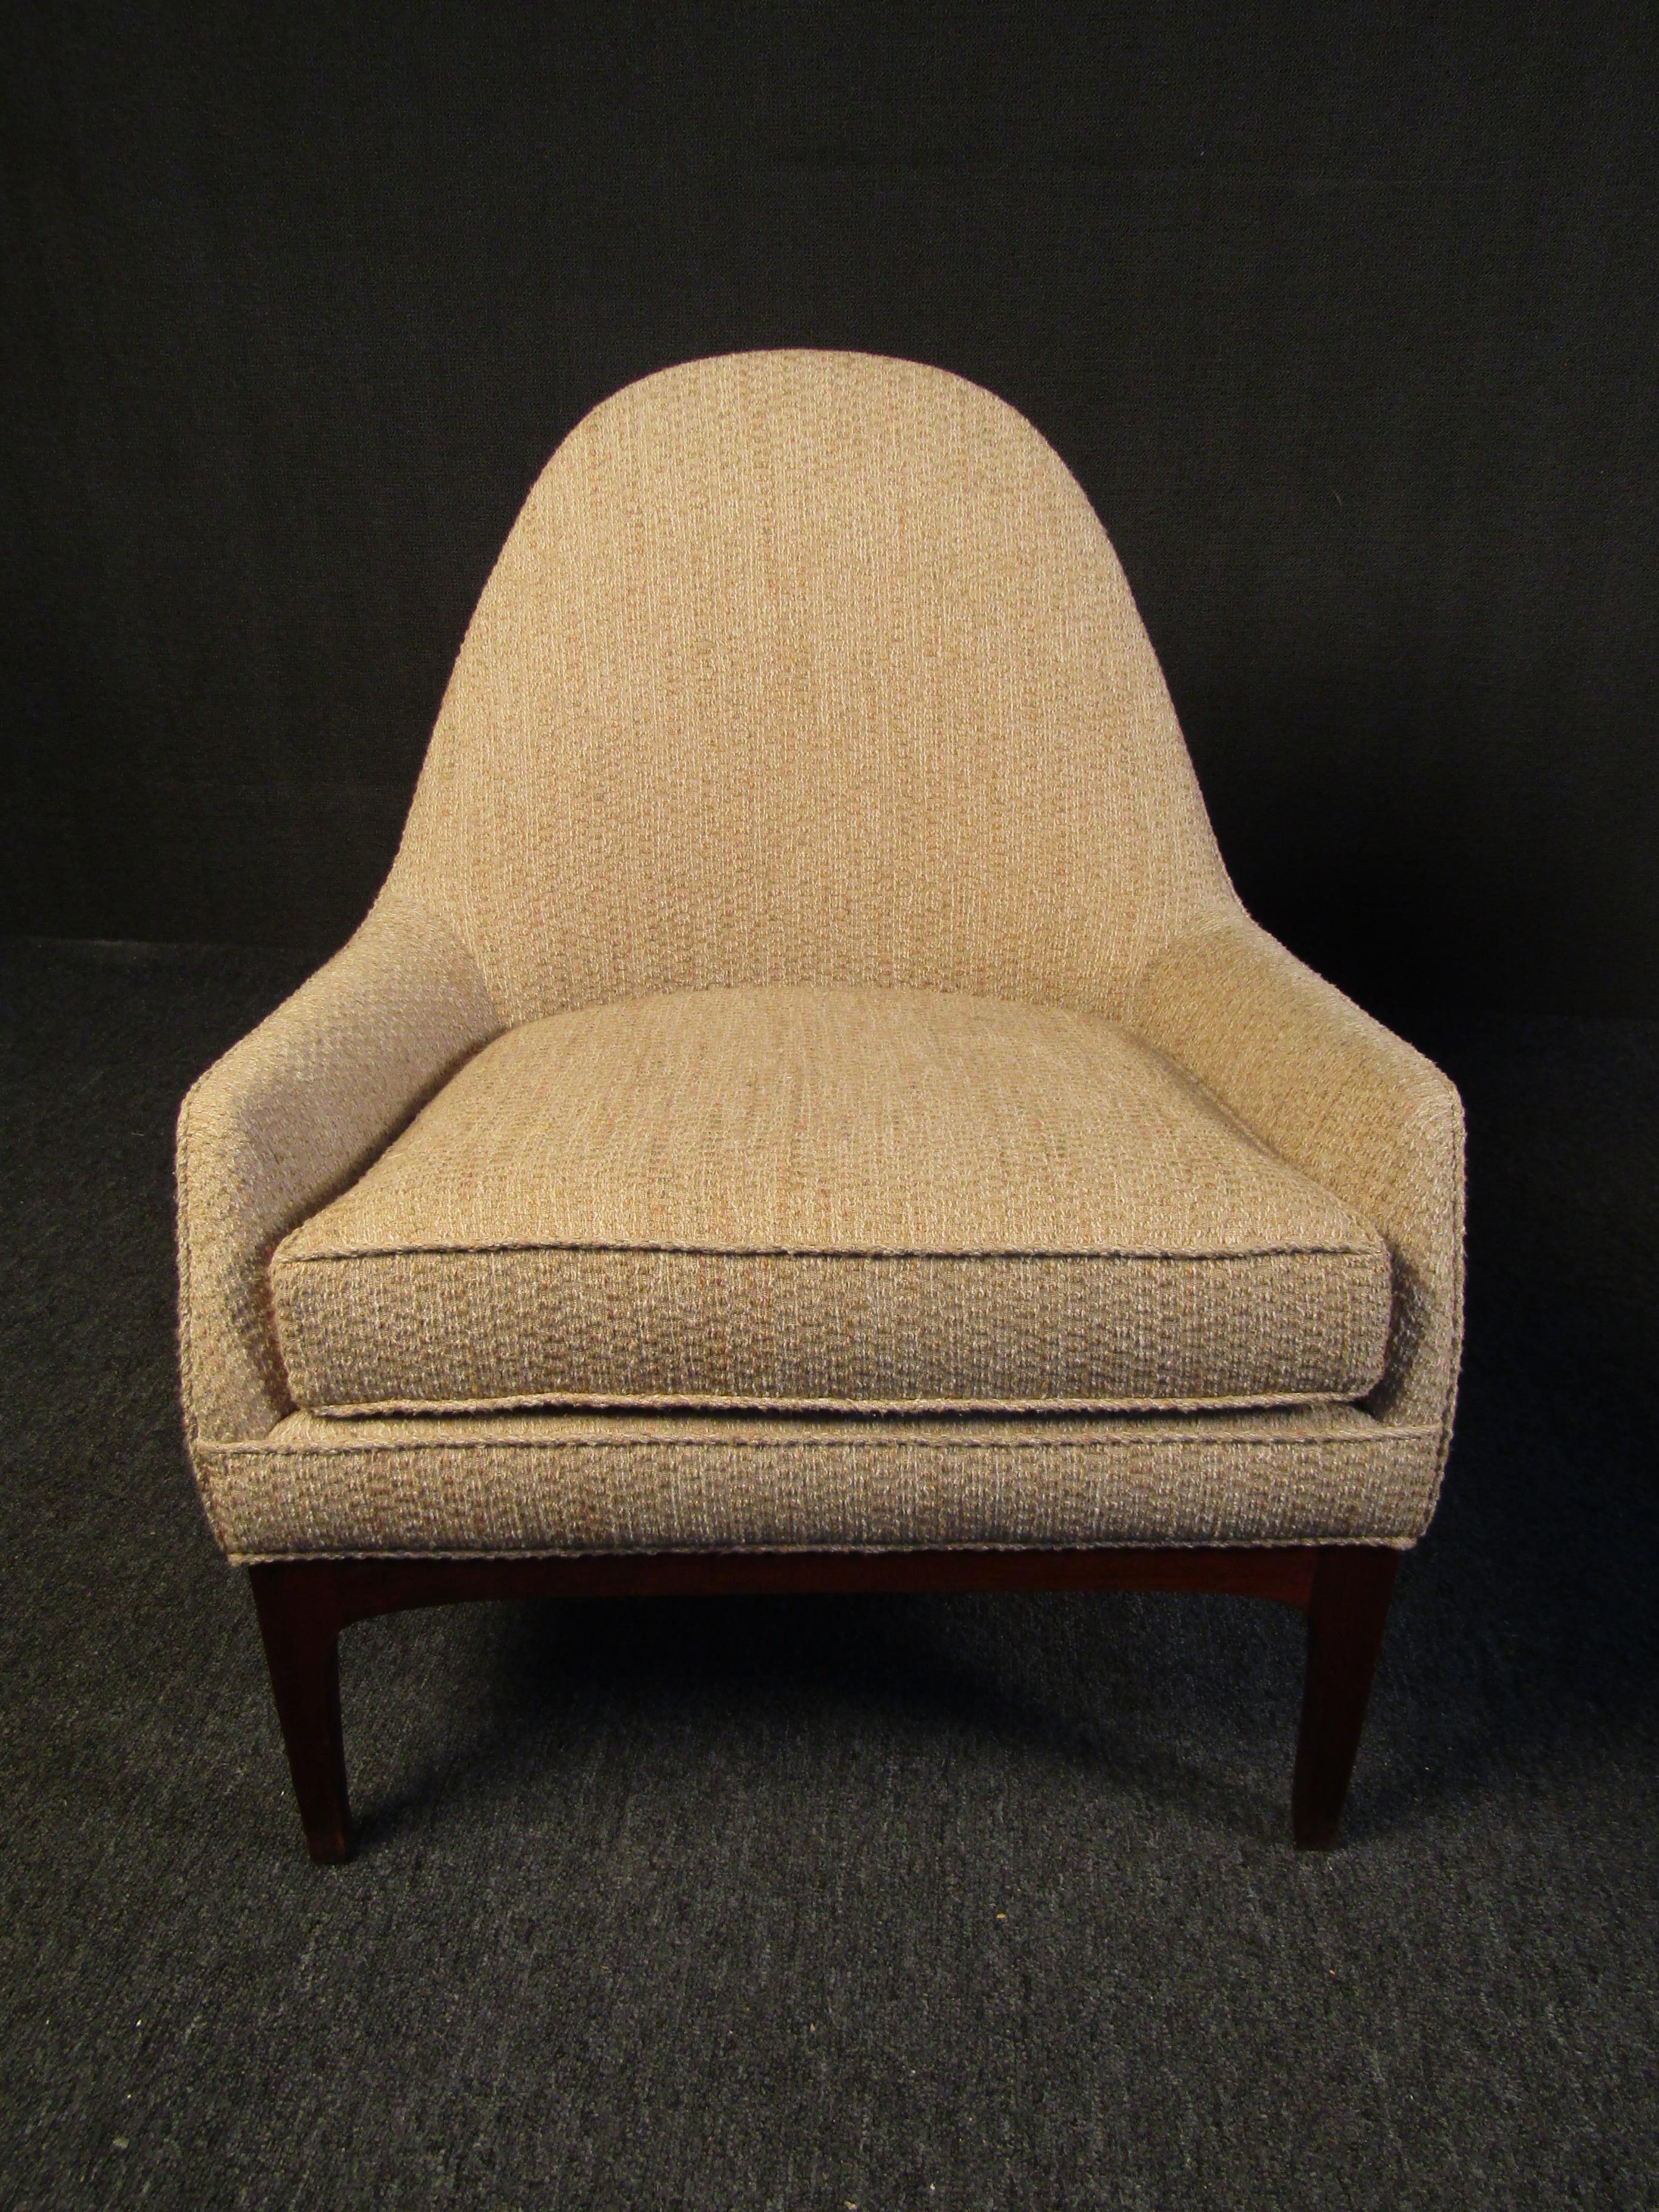 Upholstery Pair of Elegant Mid-Century Modern Reading Chairs